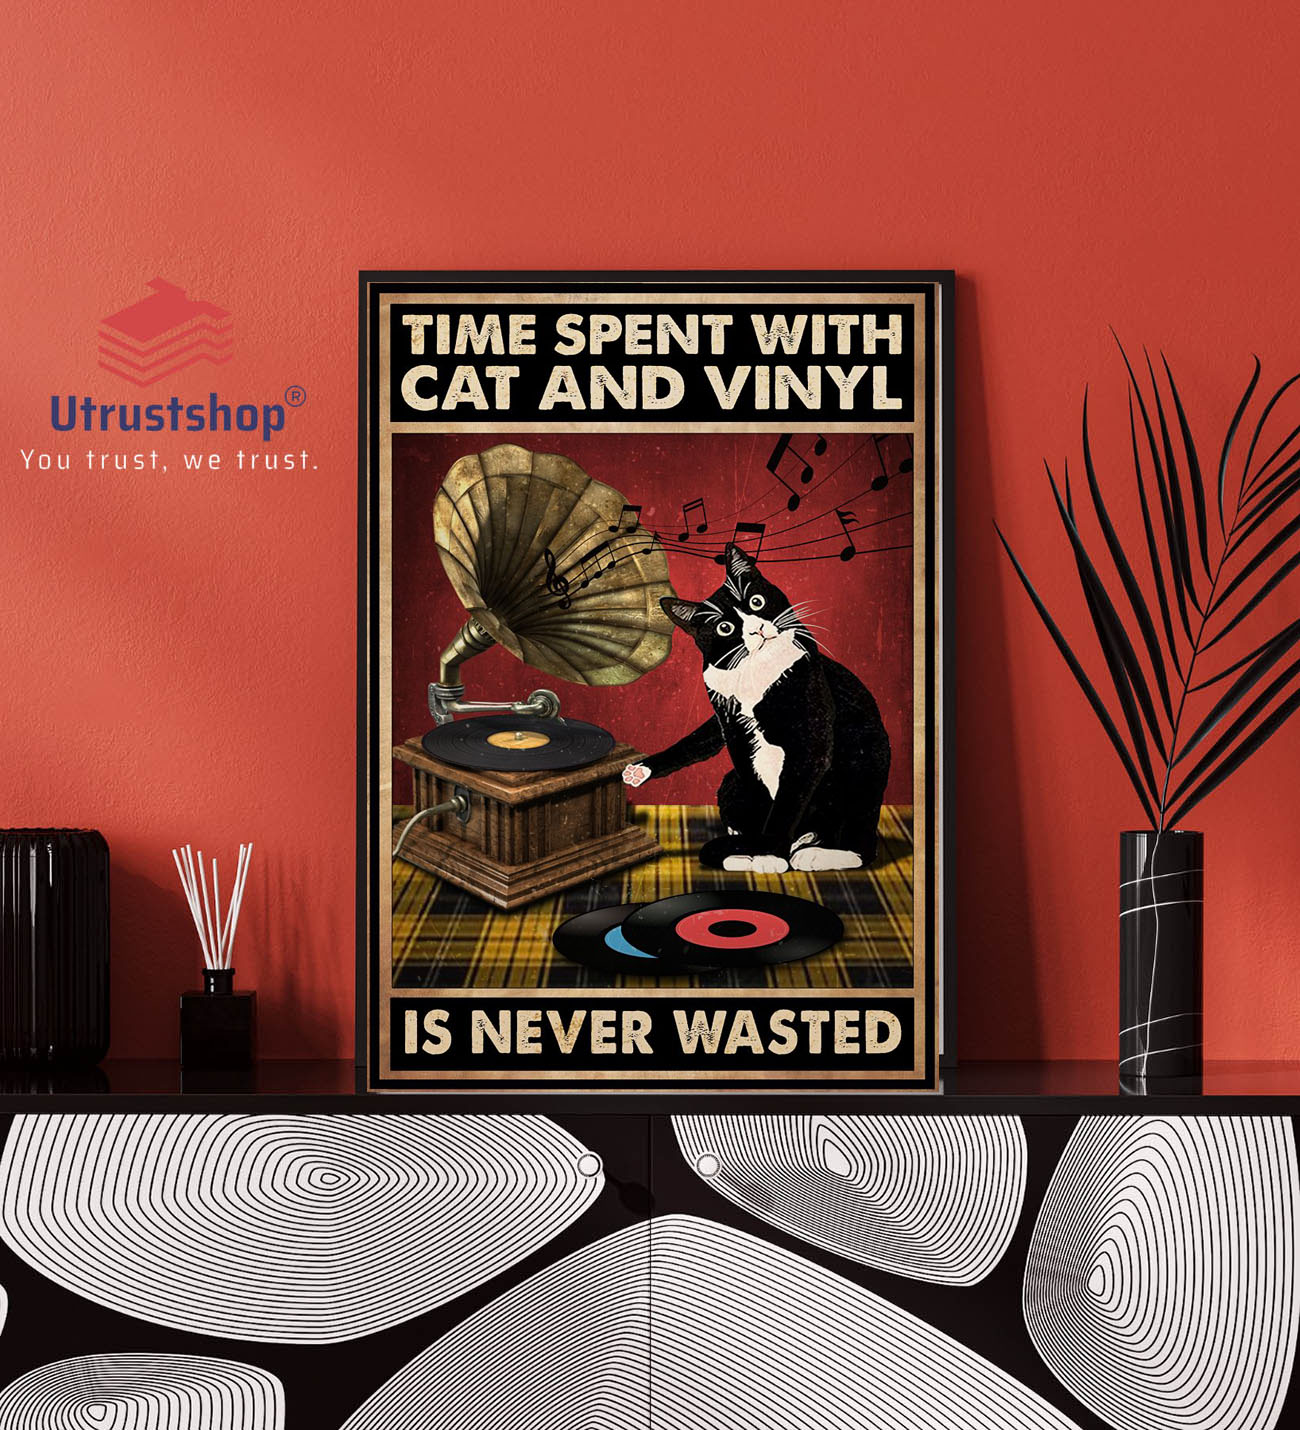 Time spent with cat and vinyl is never wasted poster